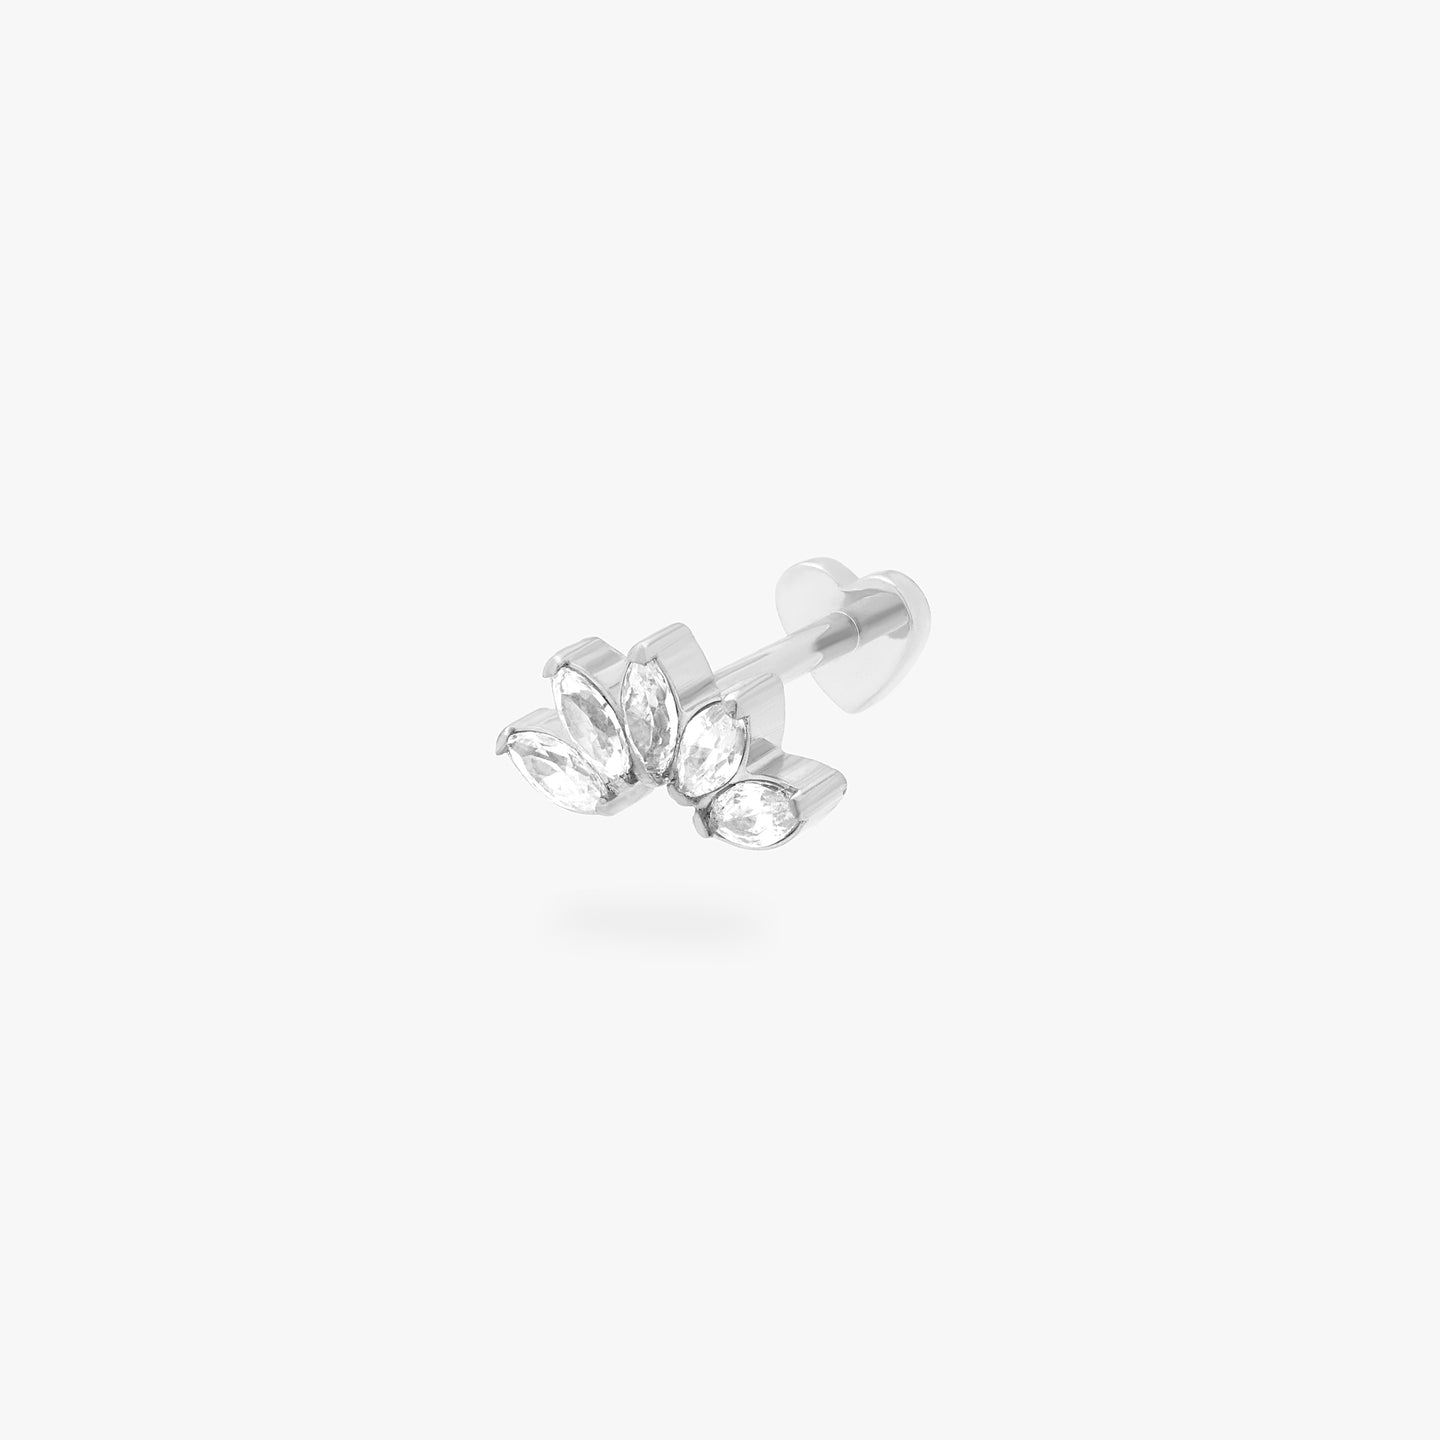 This is an image of a silver/clear crown shaped flatback top that has 5 marquise shaped CZs and a heart-shaped silver flatback post. color:null|silver/clear